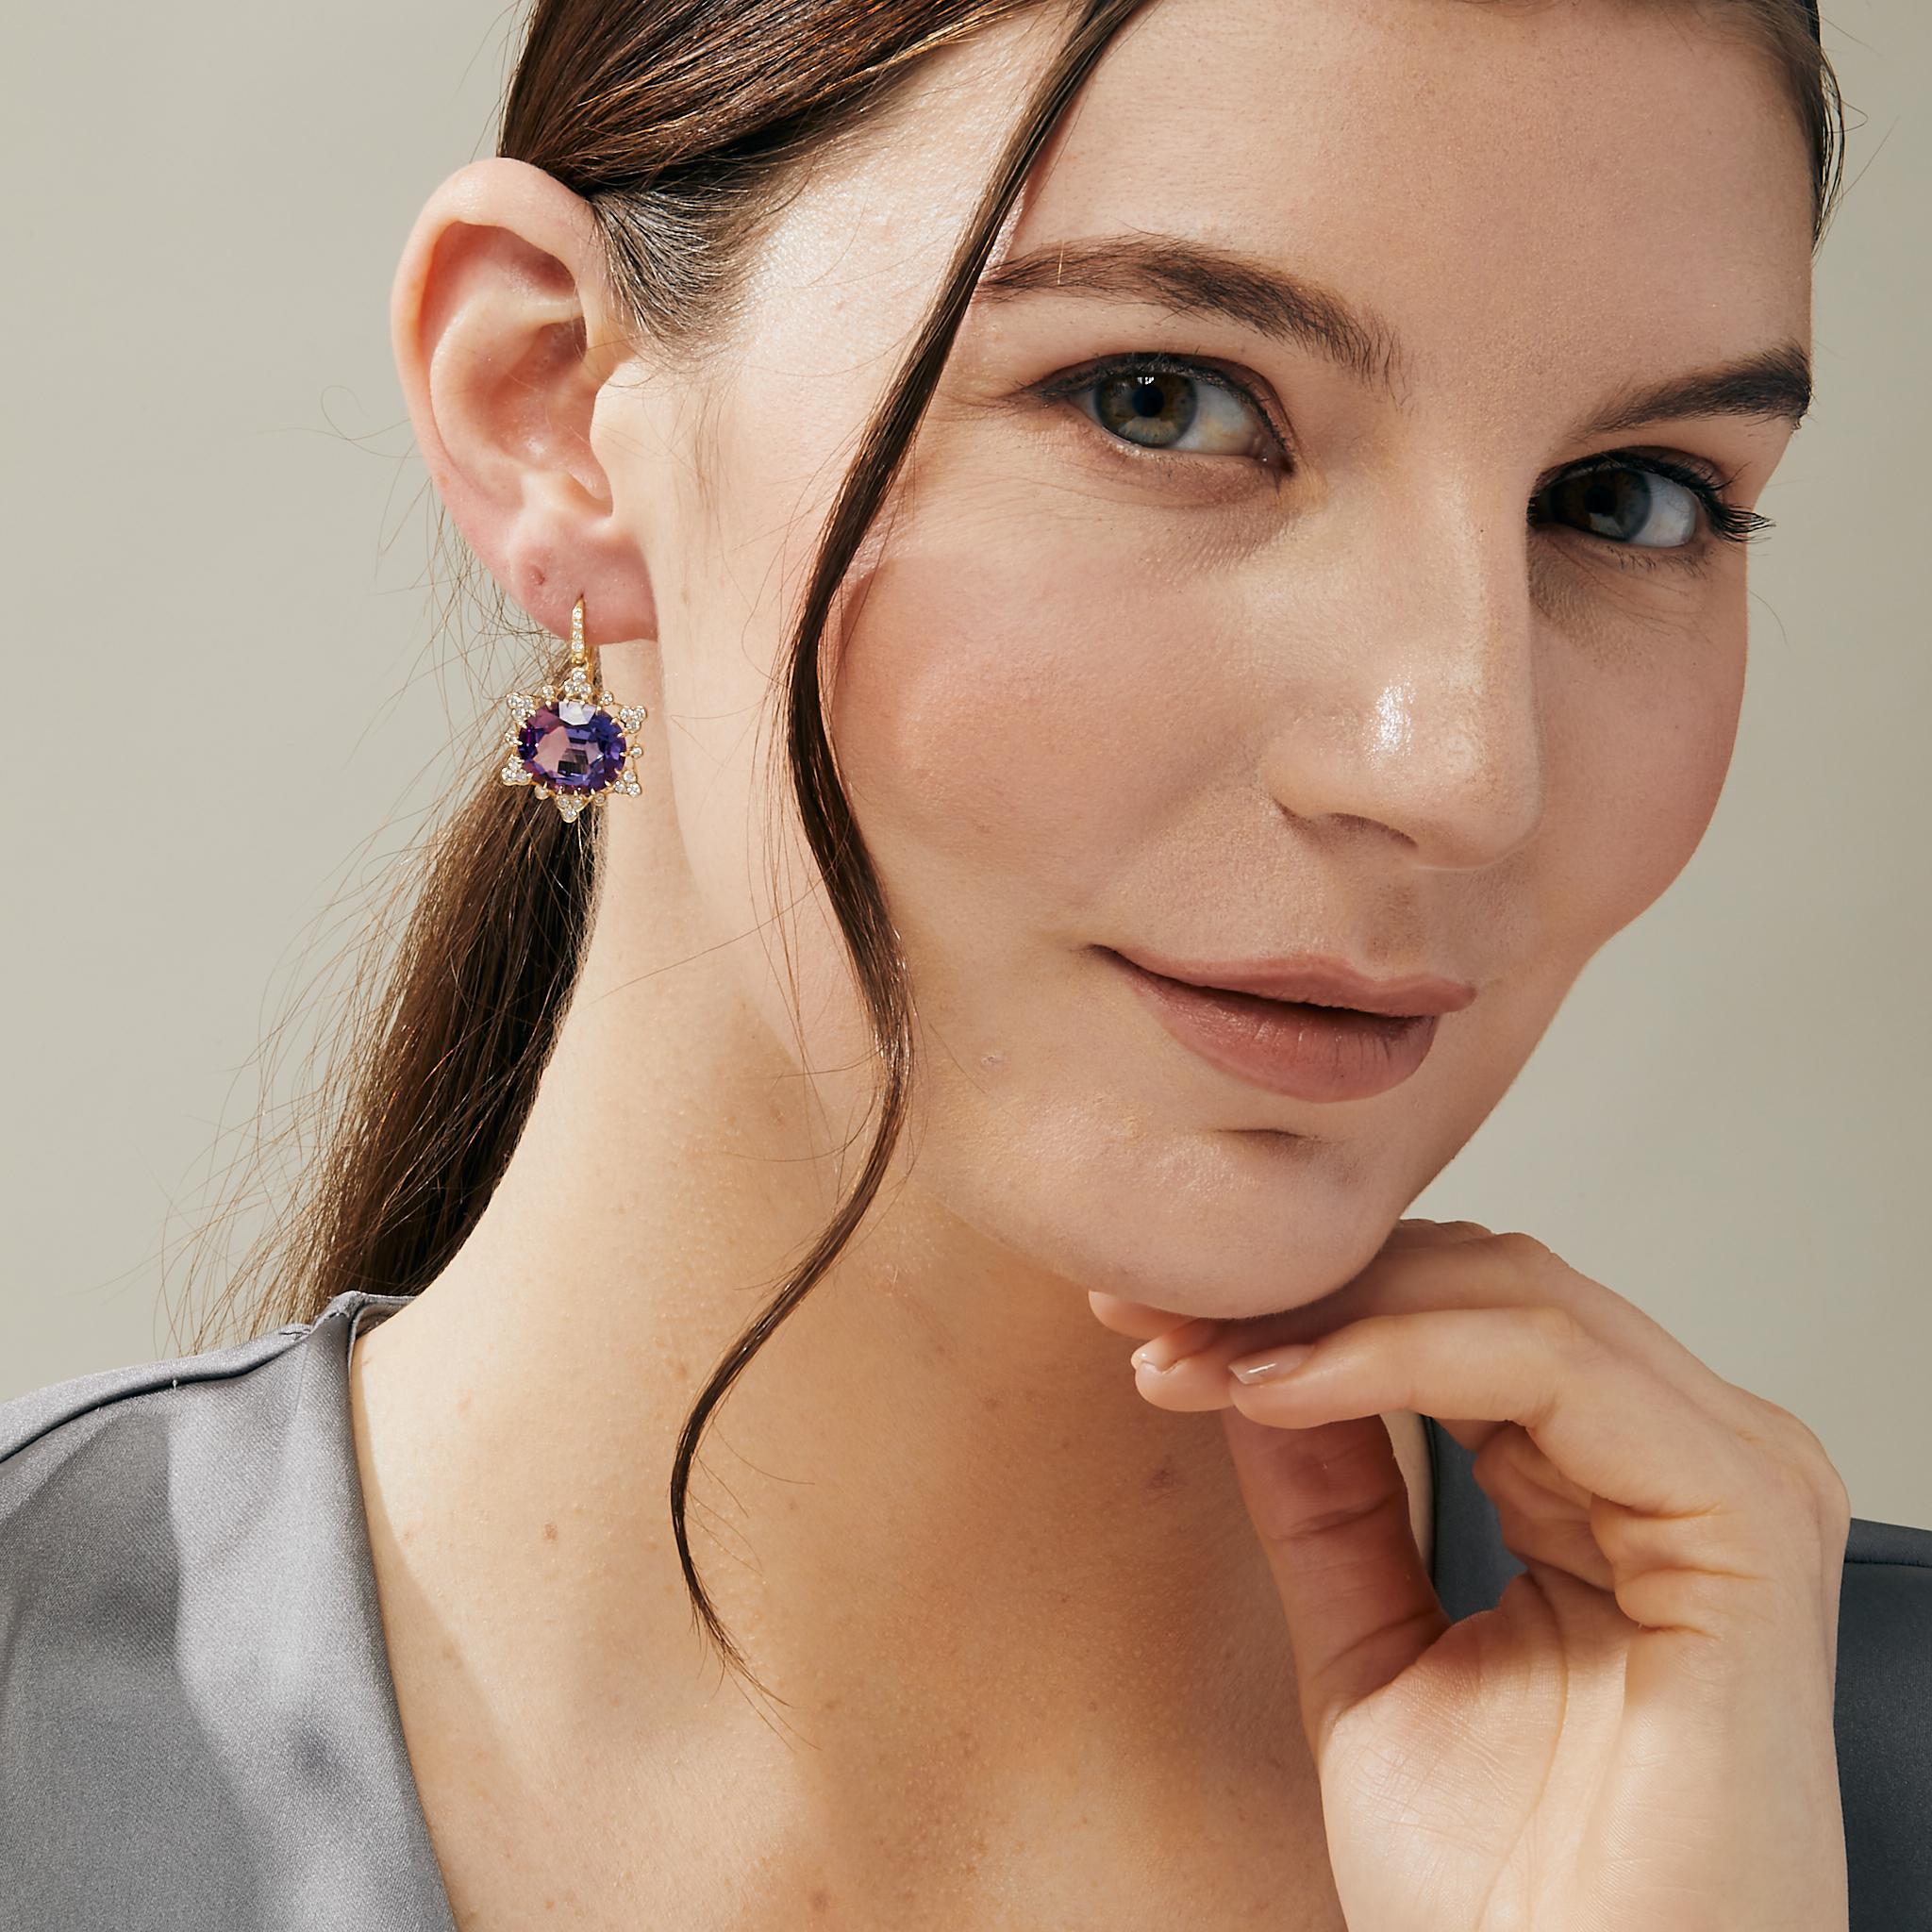 Created in 18 karat yellow gold
Amethyst 13 carats approx.
Diamonds 0.60 carat approx.
French wire for pierced ears

These exclusive Cosmic Gemstone Dangle Earrings are the perfect statement piece for any occasion. Adorned with an impressive 13